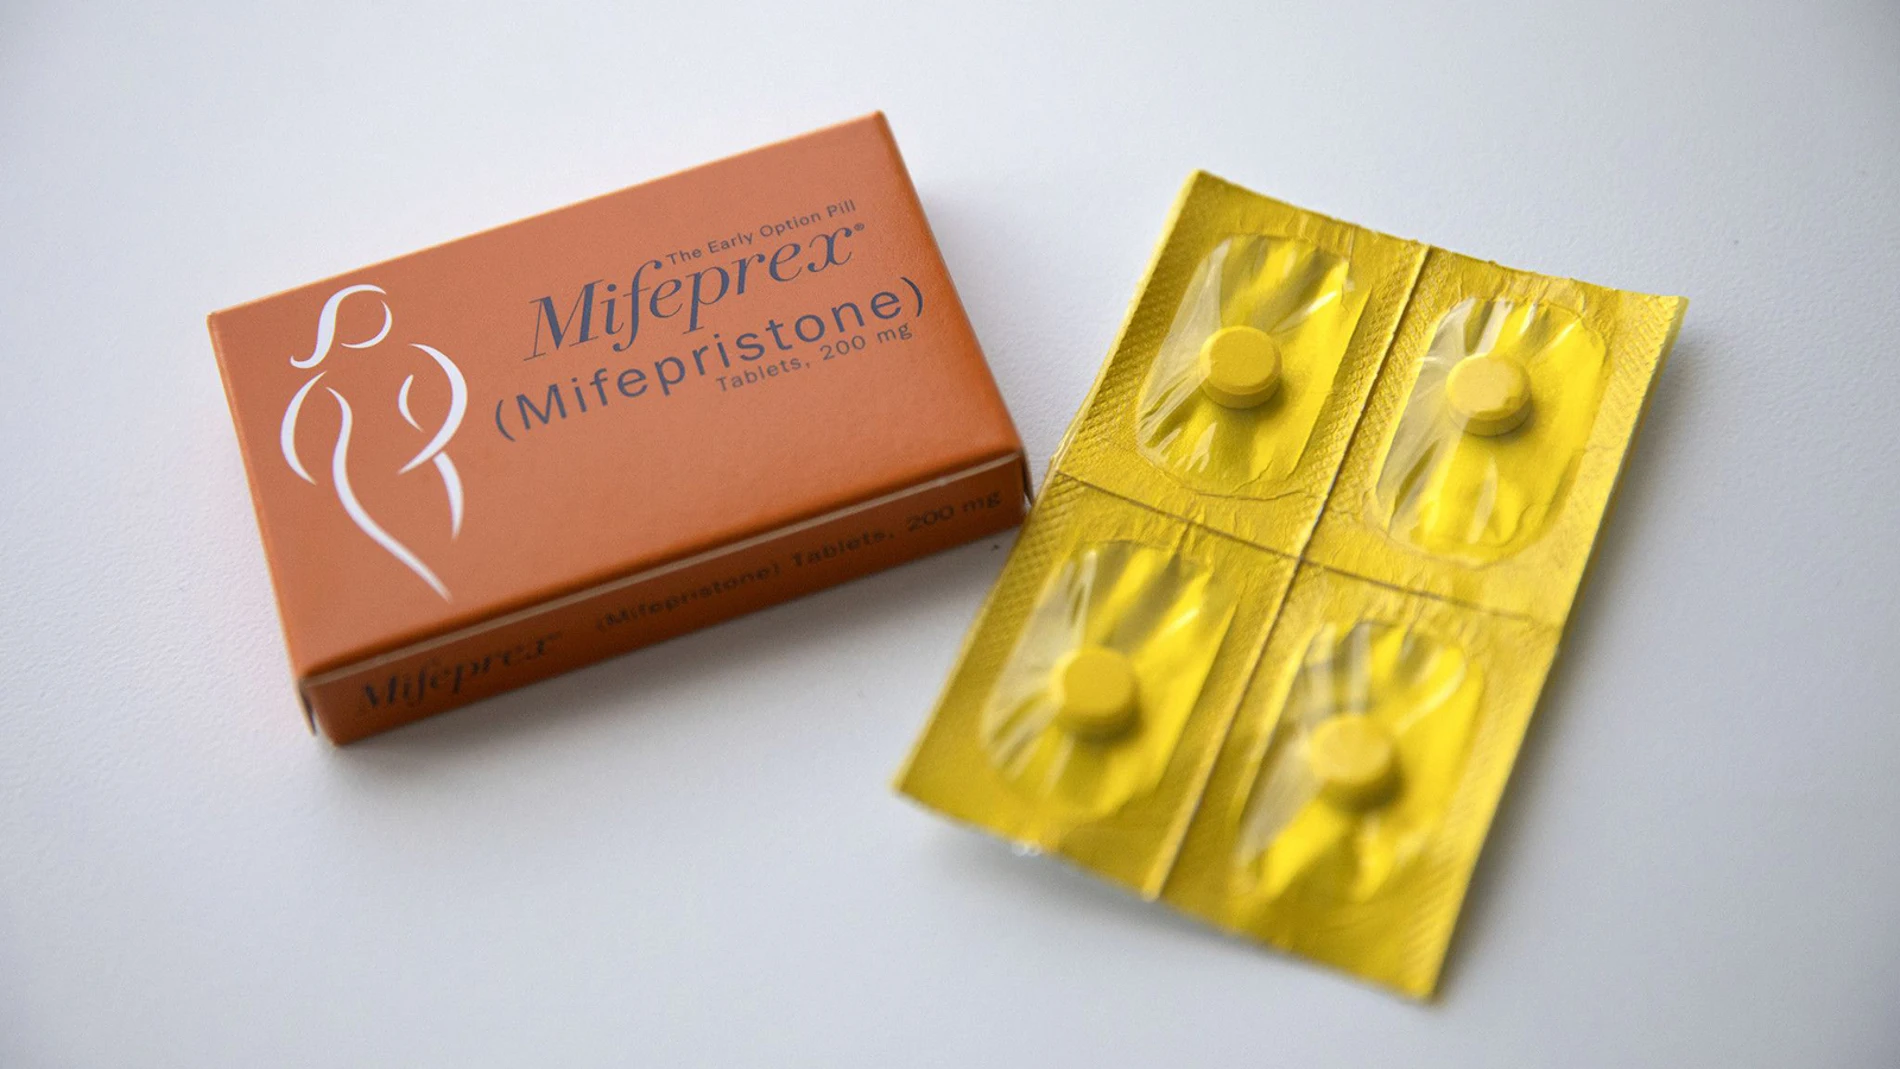 September 7, 2022: In this 2018 photo, mifepristone and misoprostol pills are provided at a Carafem clinic for medication abortions in Skokie, Illinois. (Foto de ARCHIVO) 07/09/2022